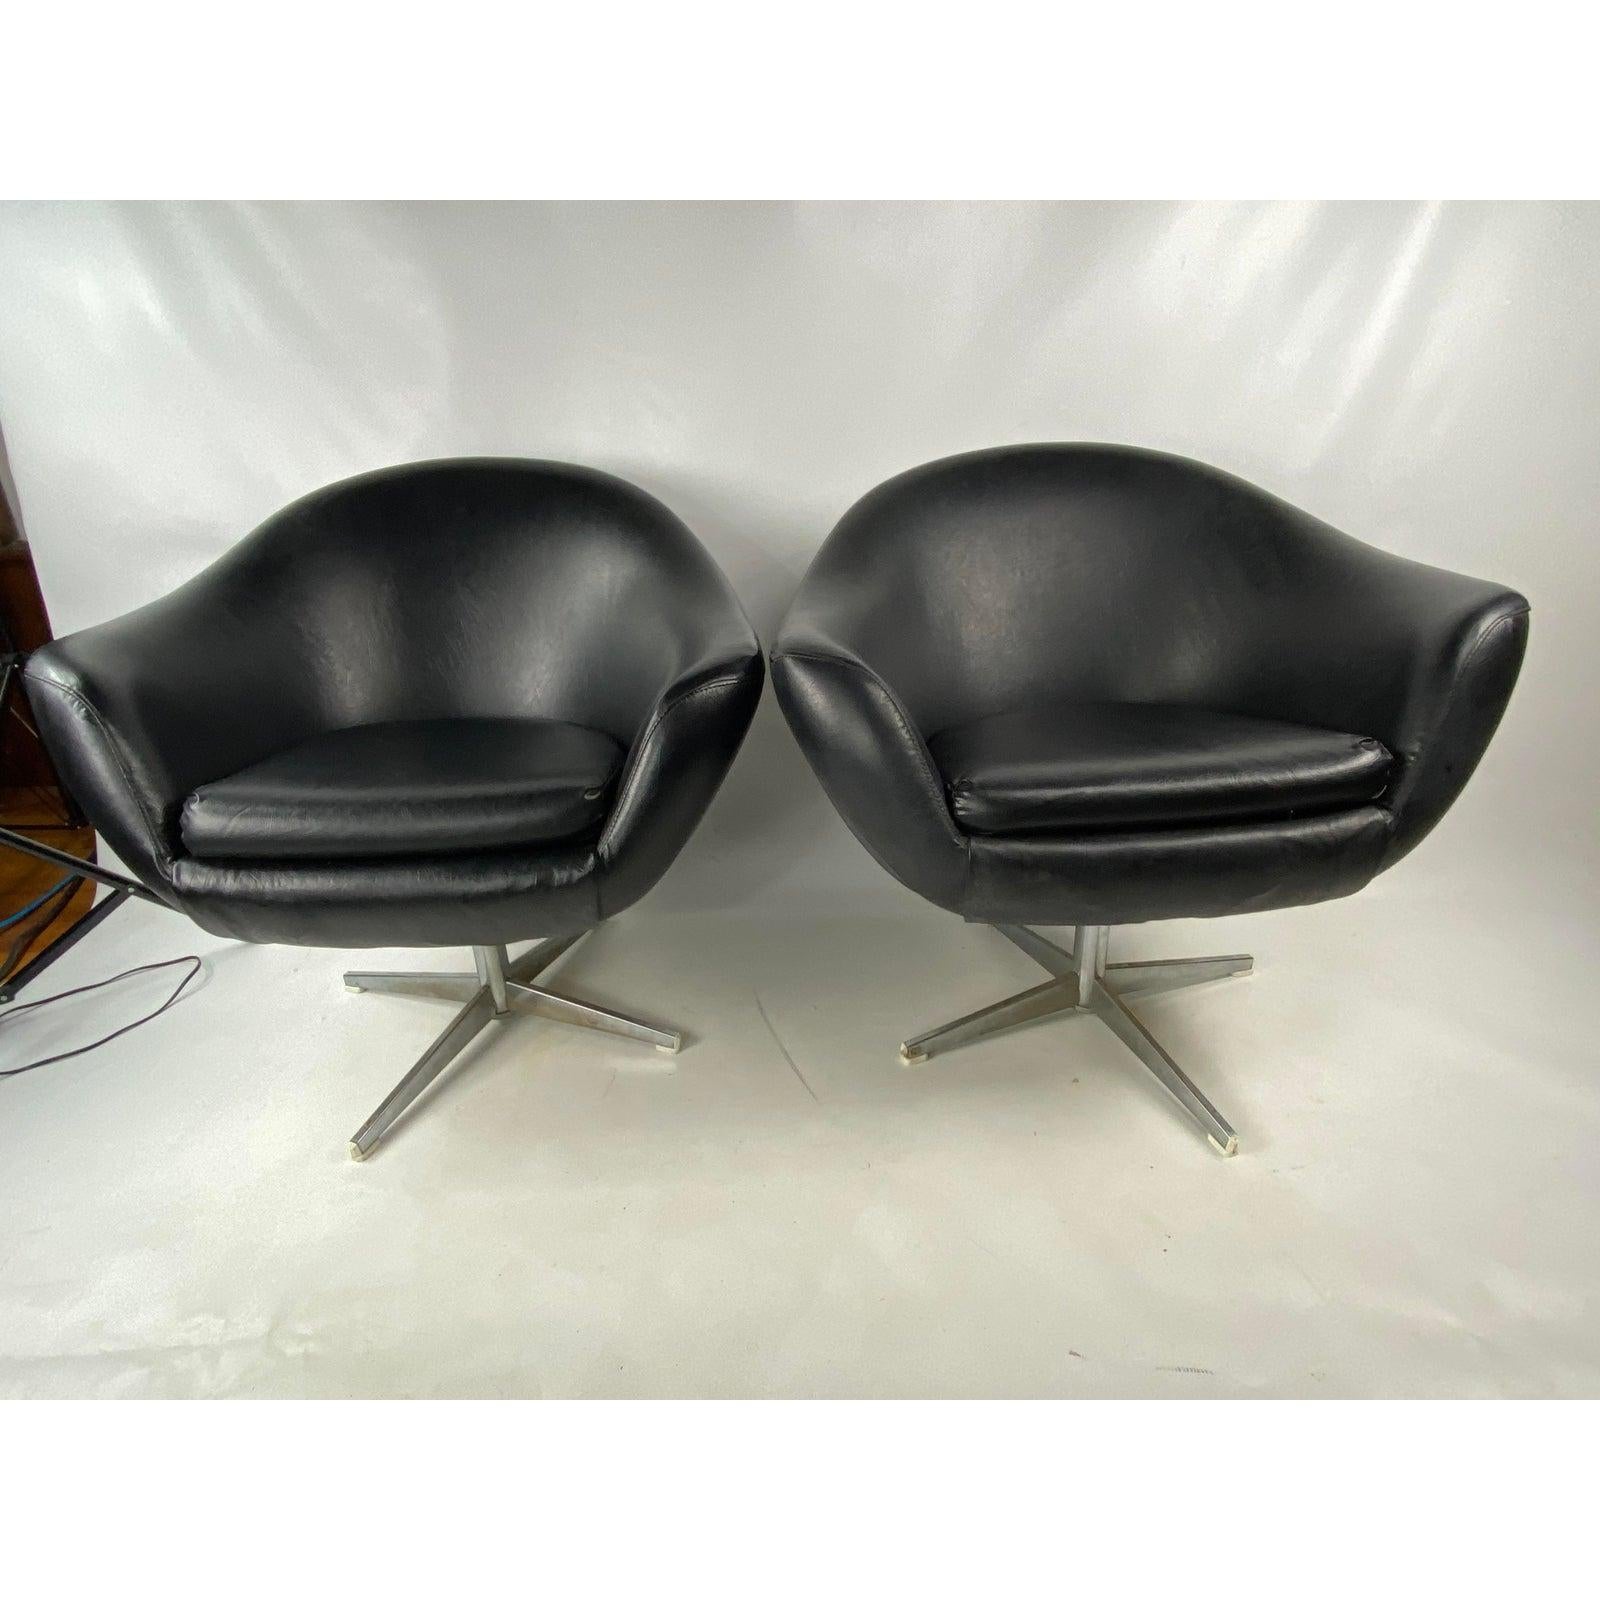 Great vintage pair of overman Swedish lounge chairs. Both match and swivel.